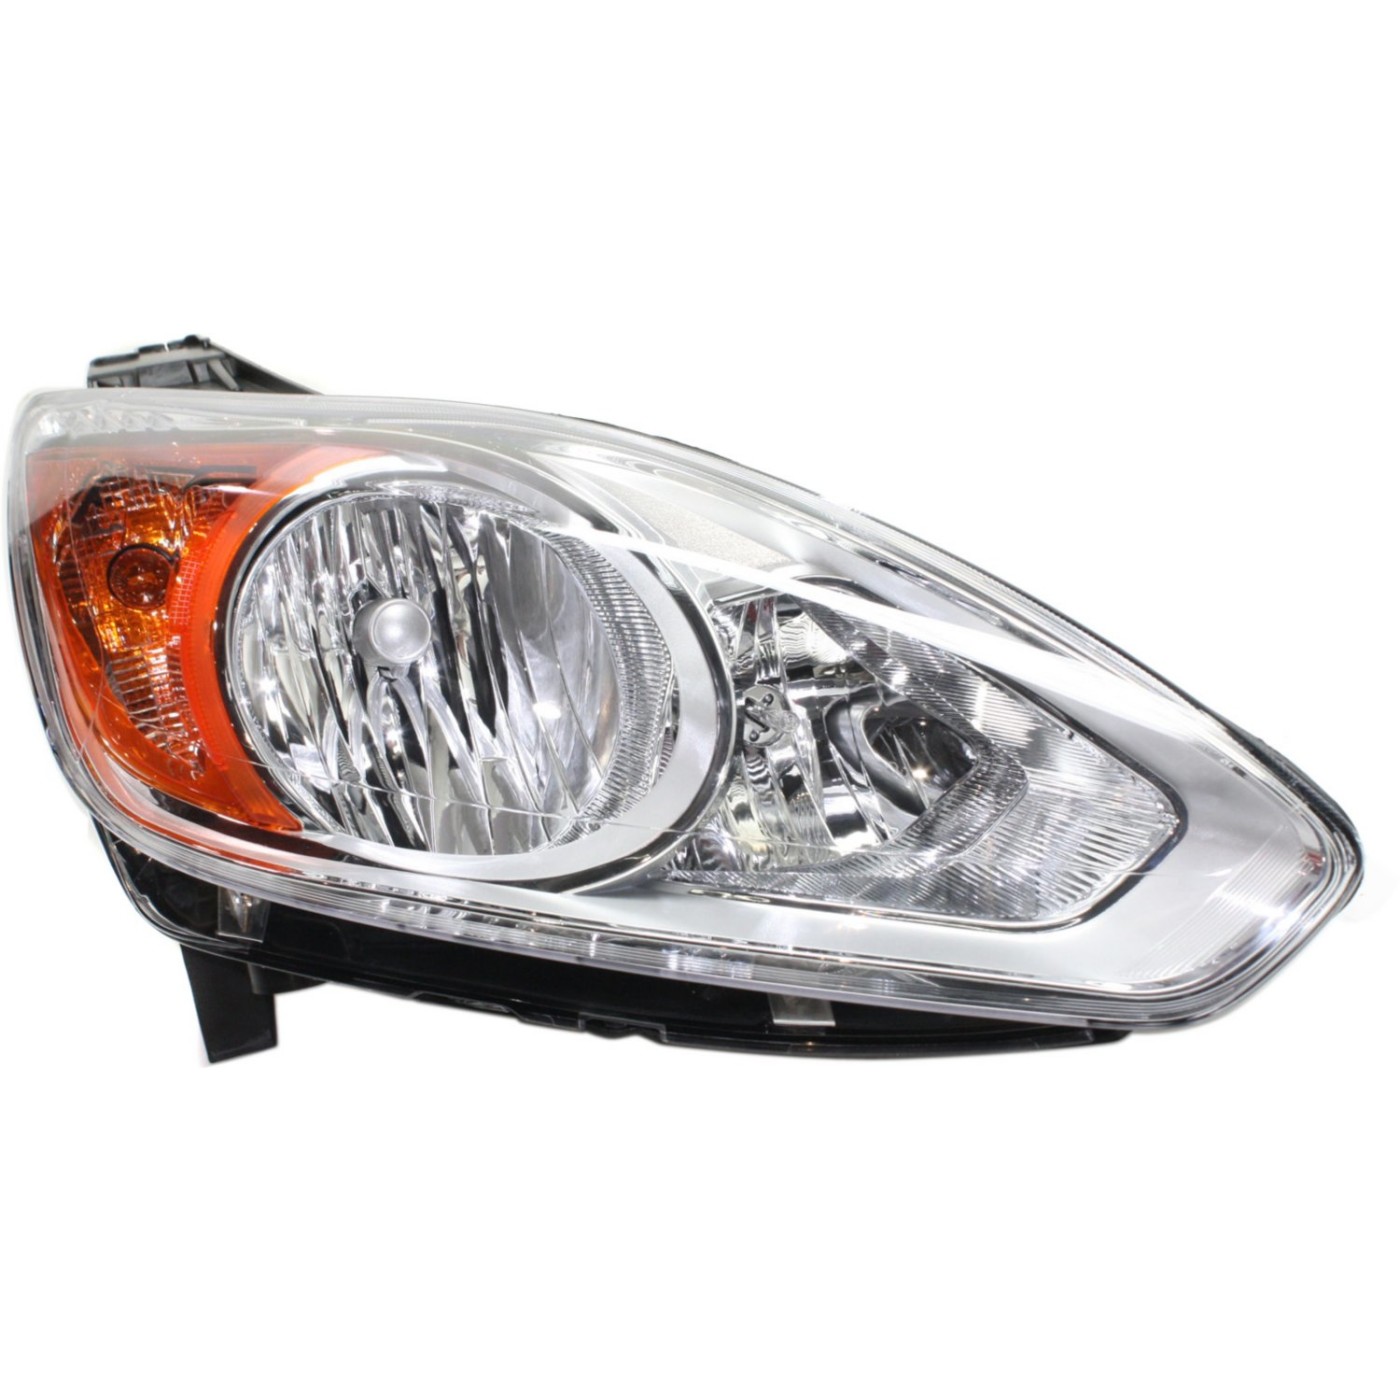 Headlight Set For 2013 2014 2015 2016 Ford CMax Left and